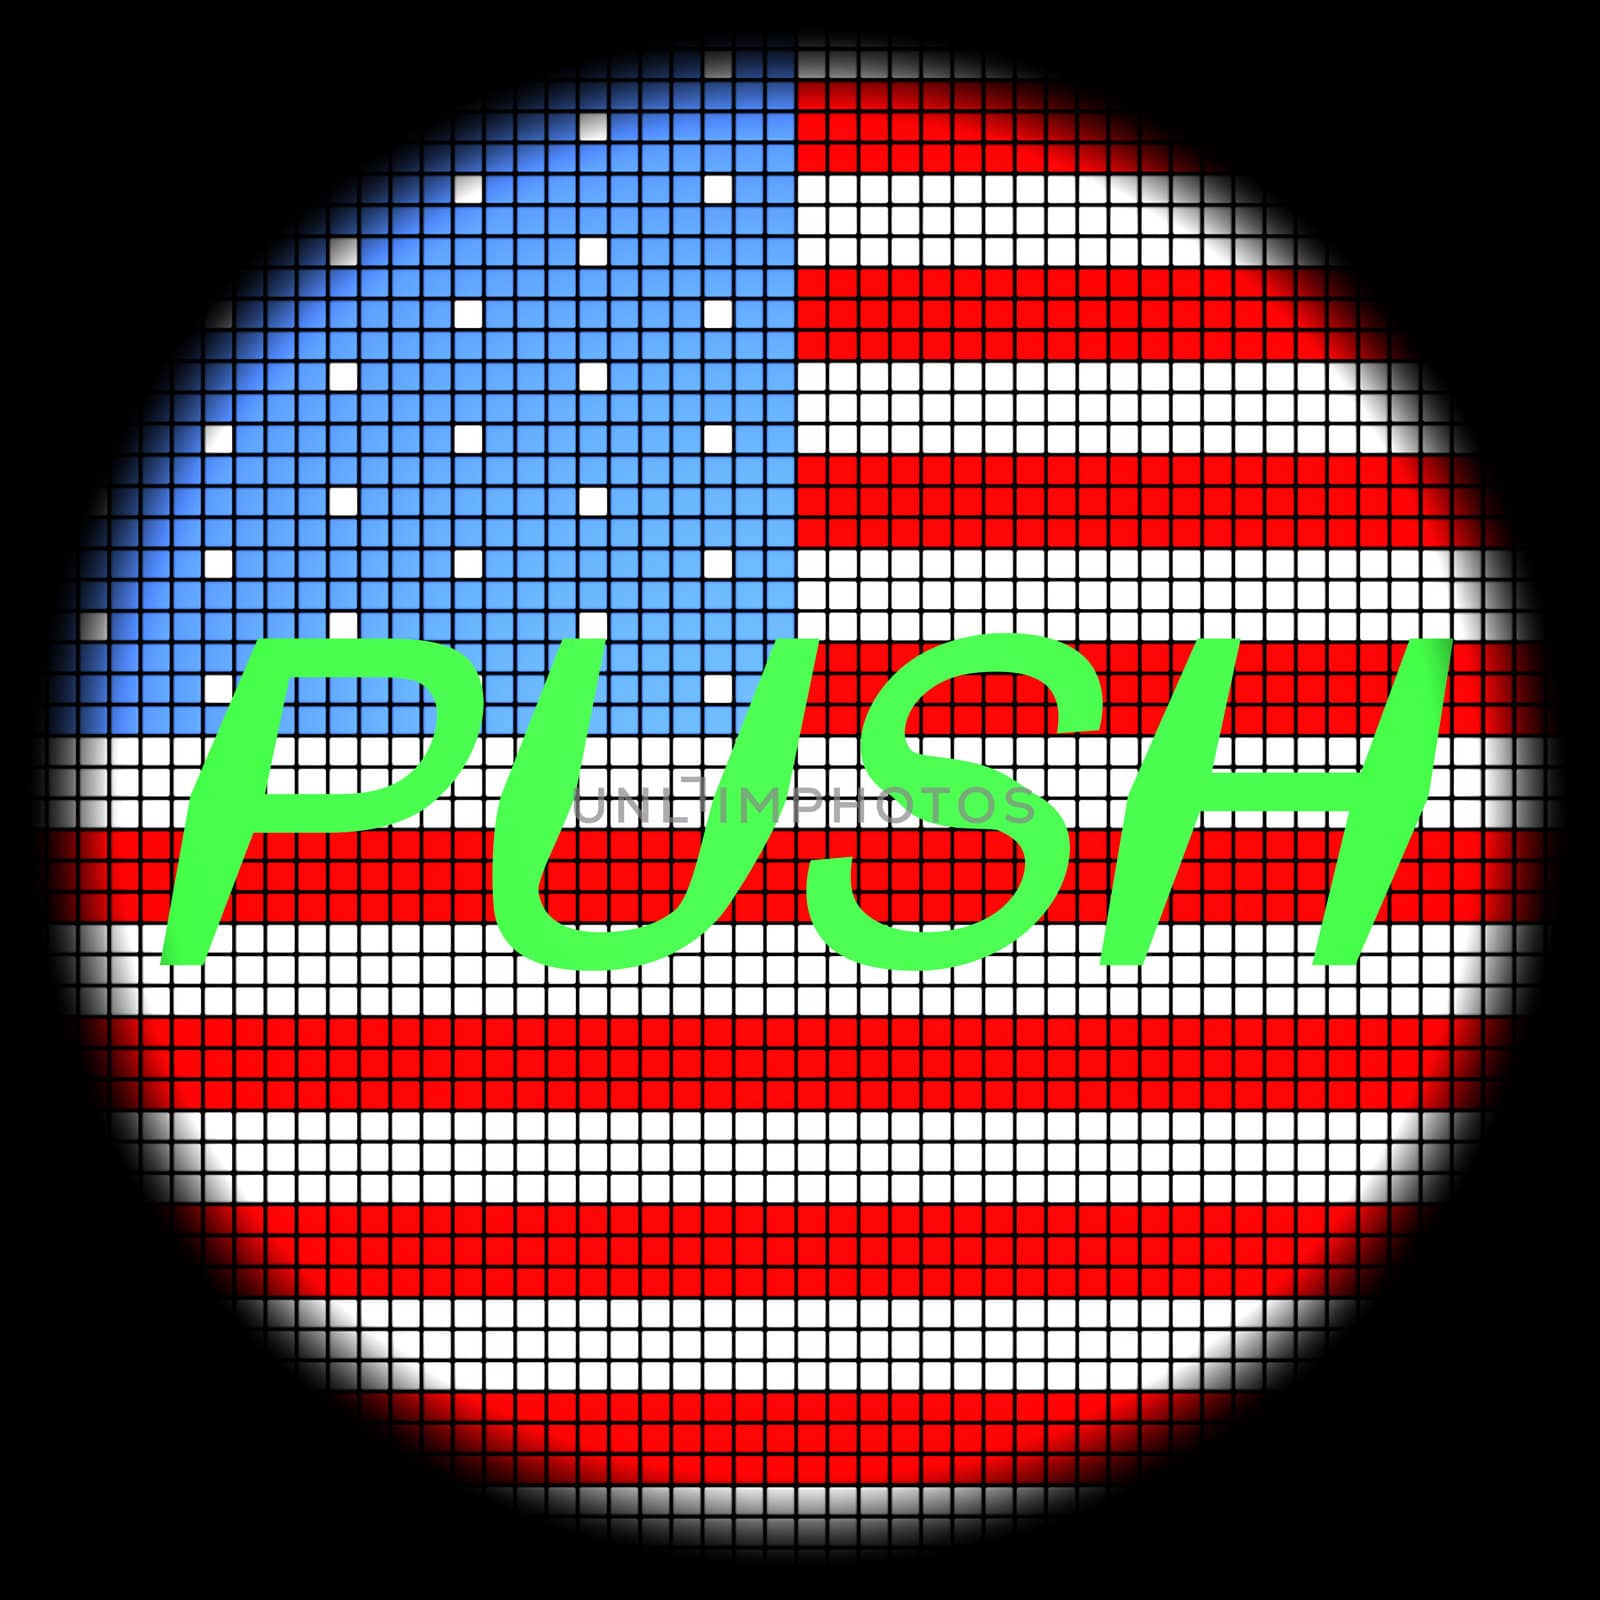 Push Icon on American Flag Checkered Background